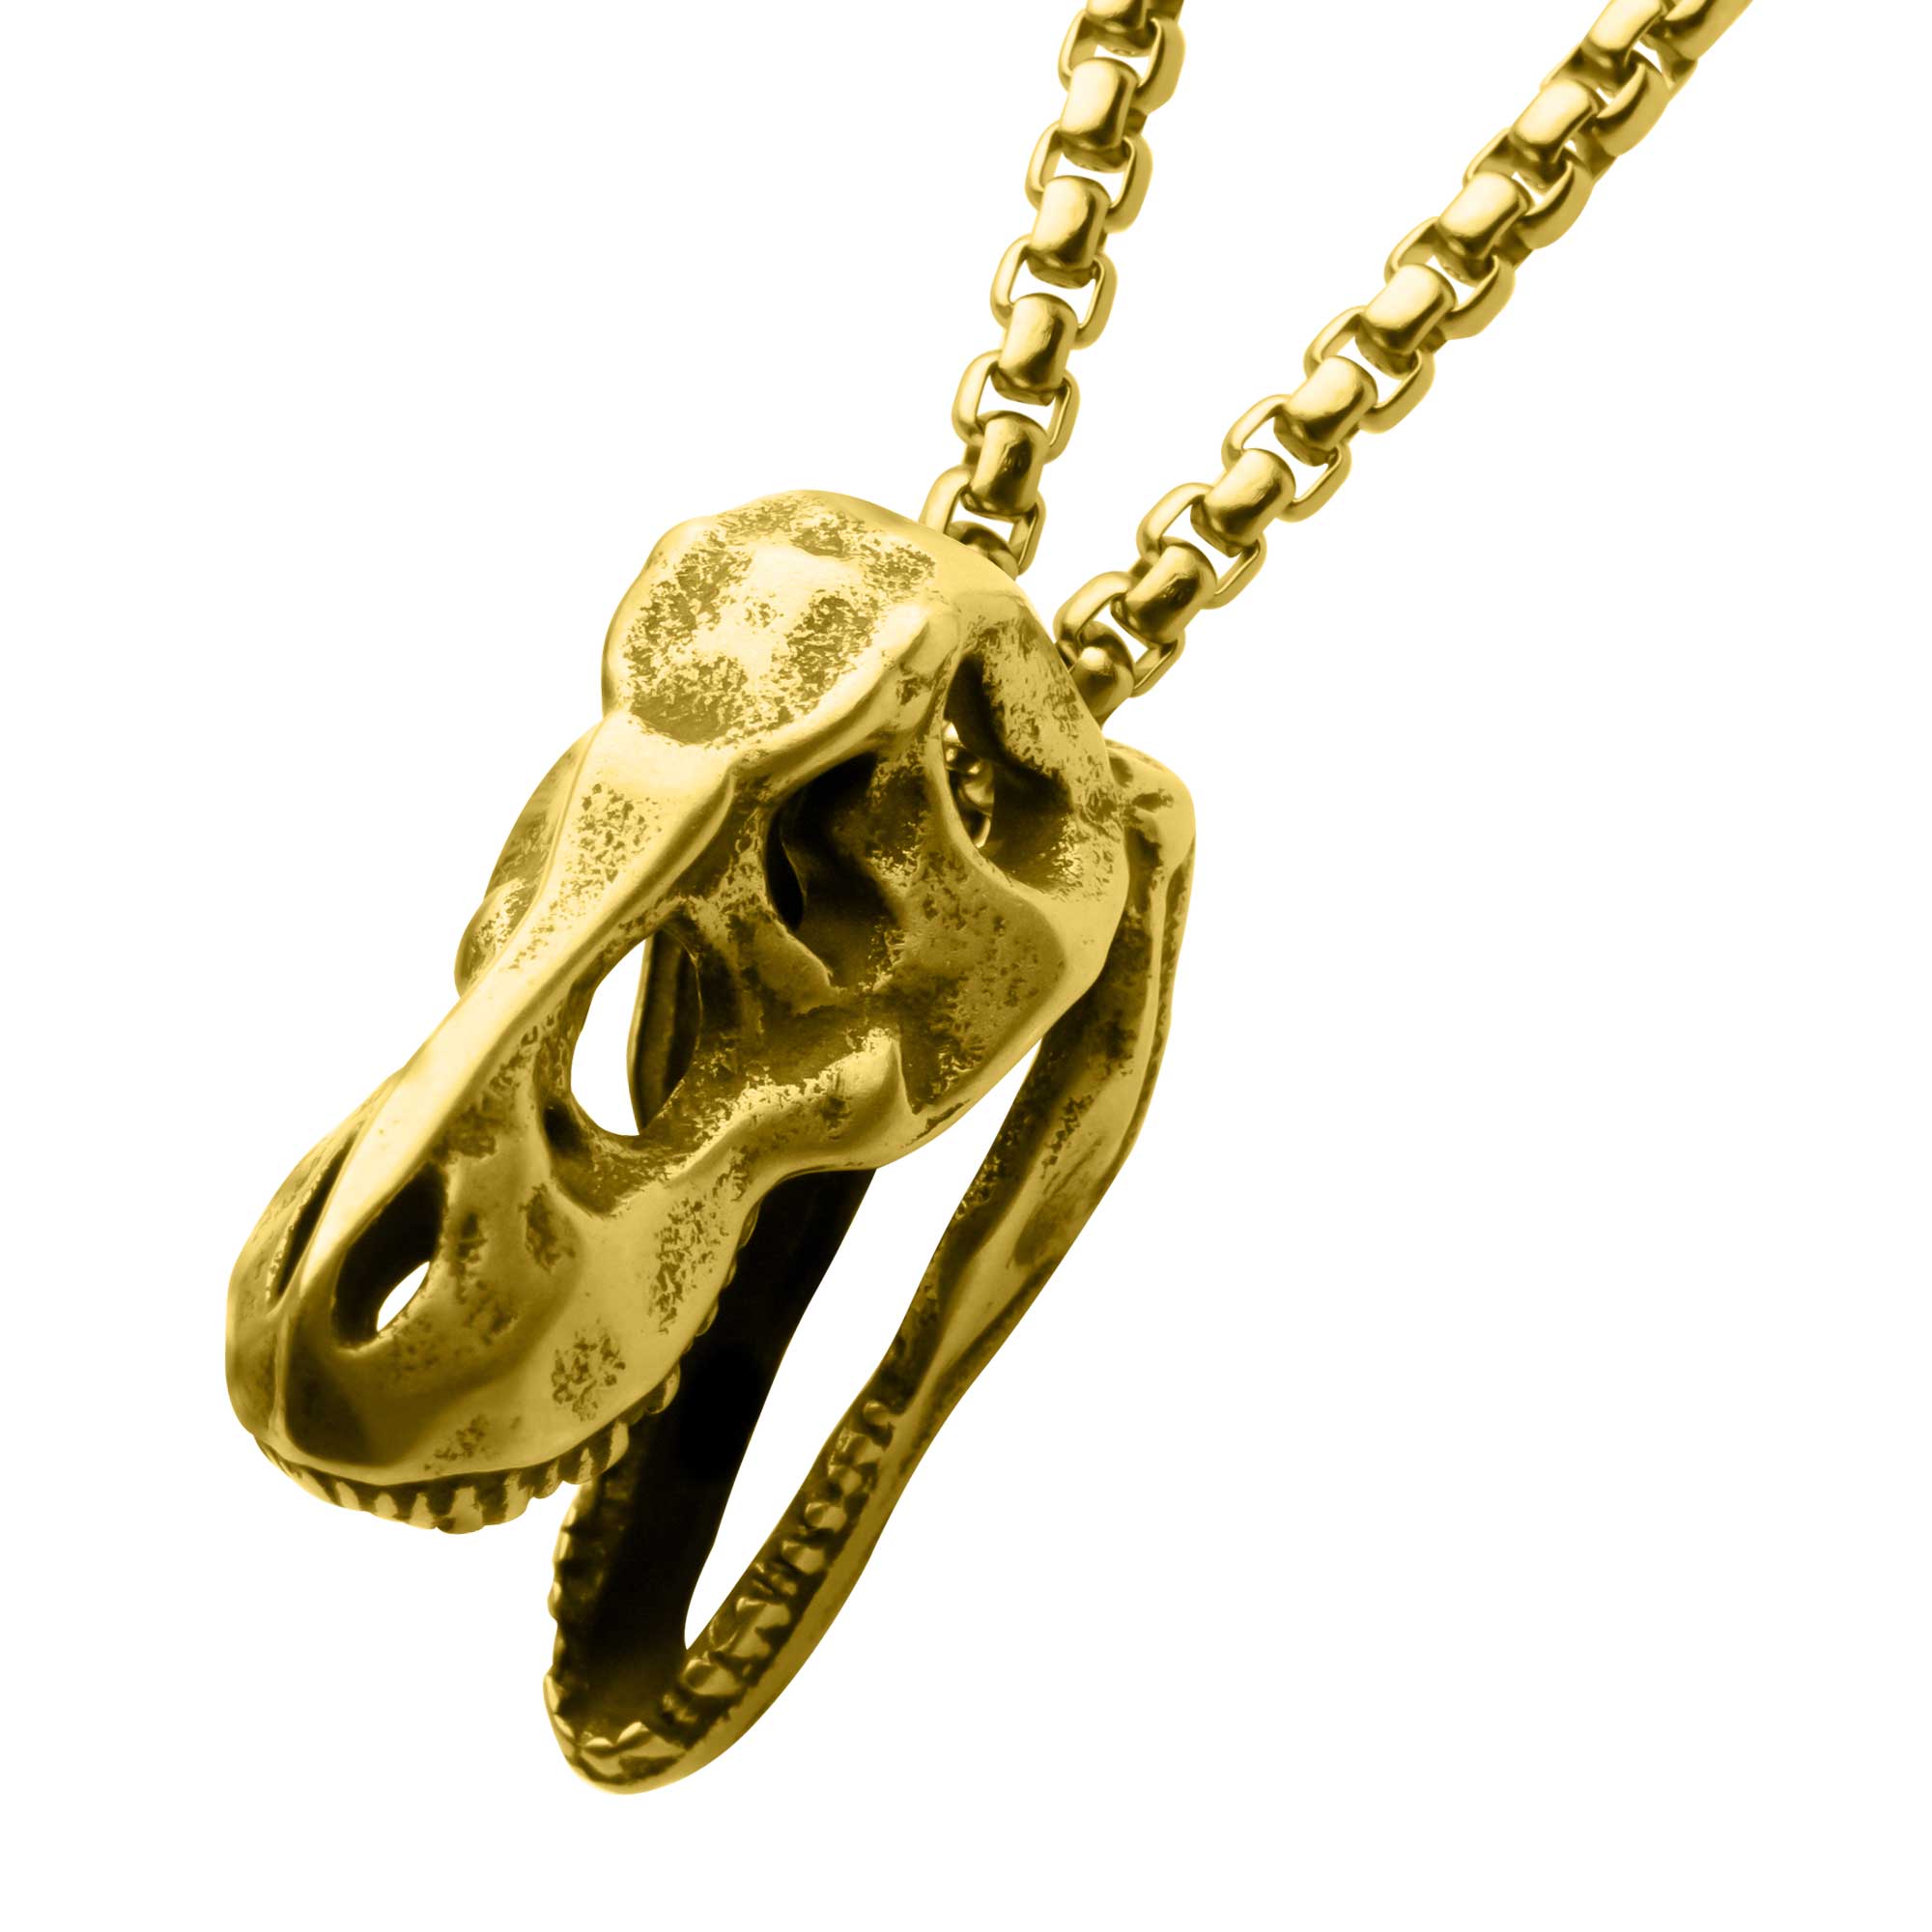 Distressed Matte 18Kt Gold IP T-Rex Skull Pendant with Chain Thurber's Fine Jewelry Wadsworth, OH